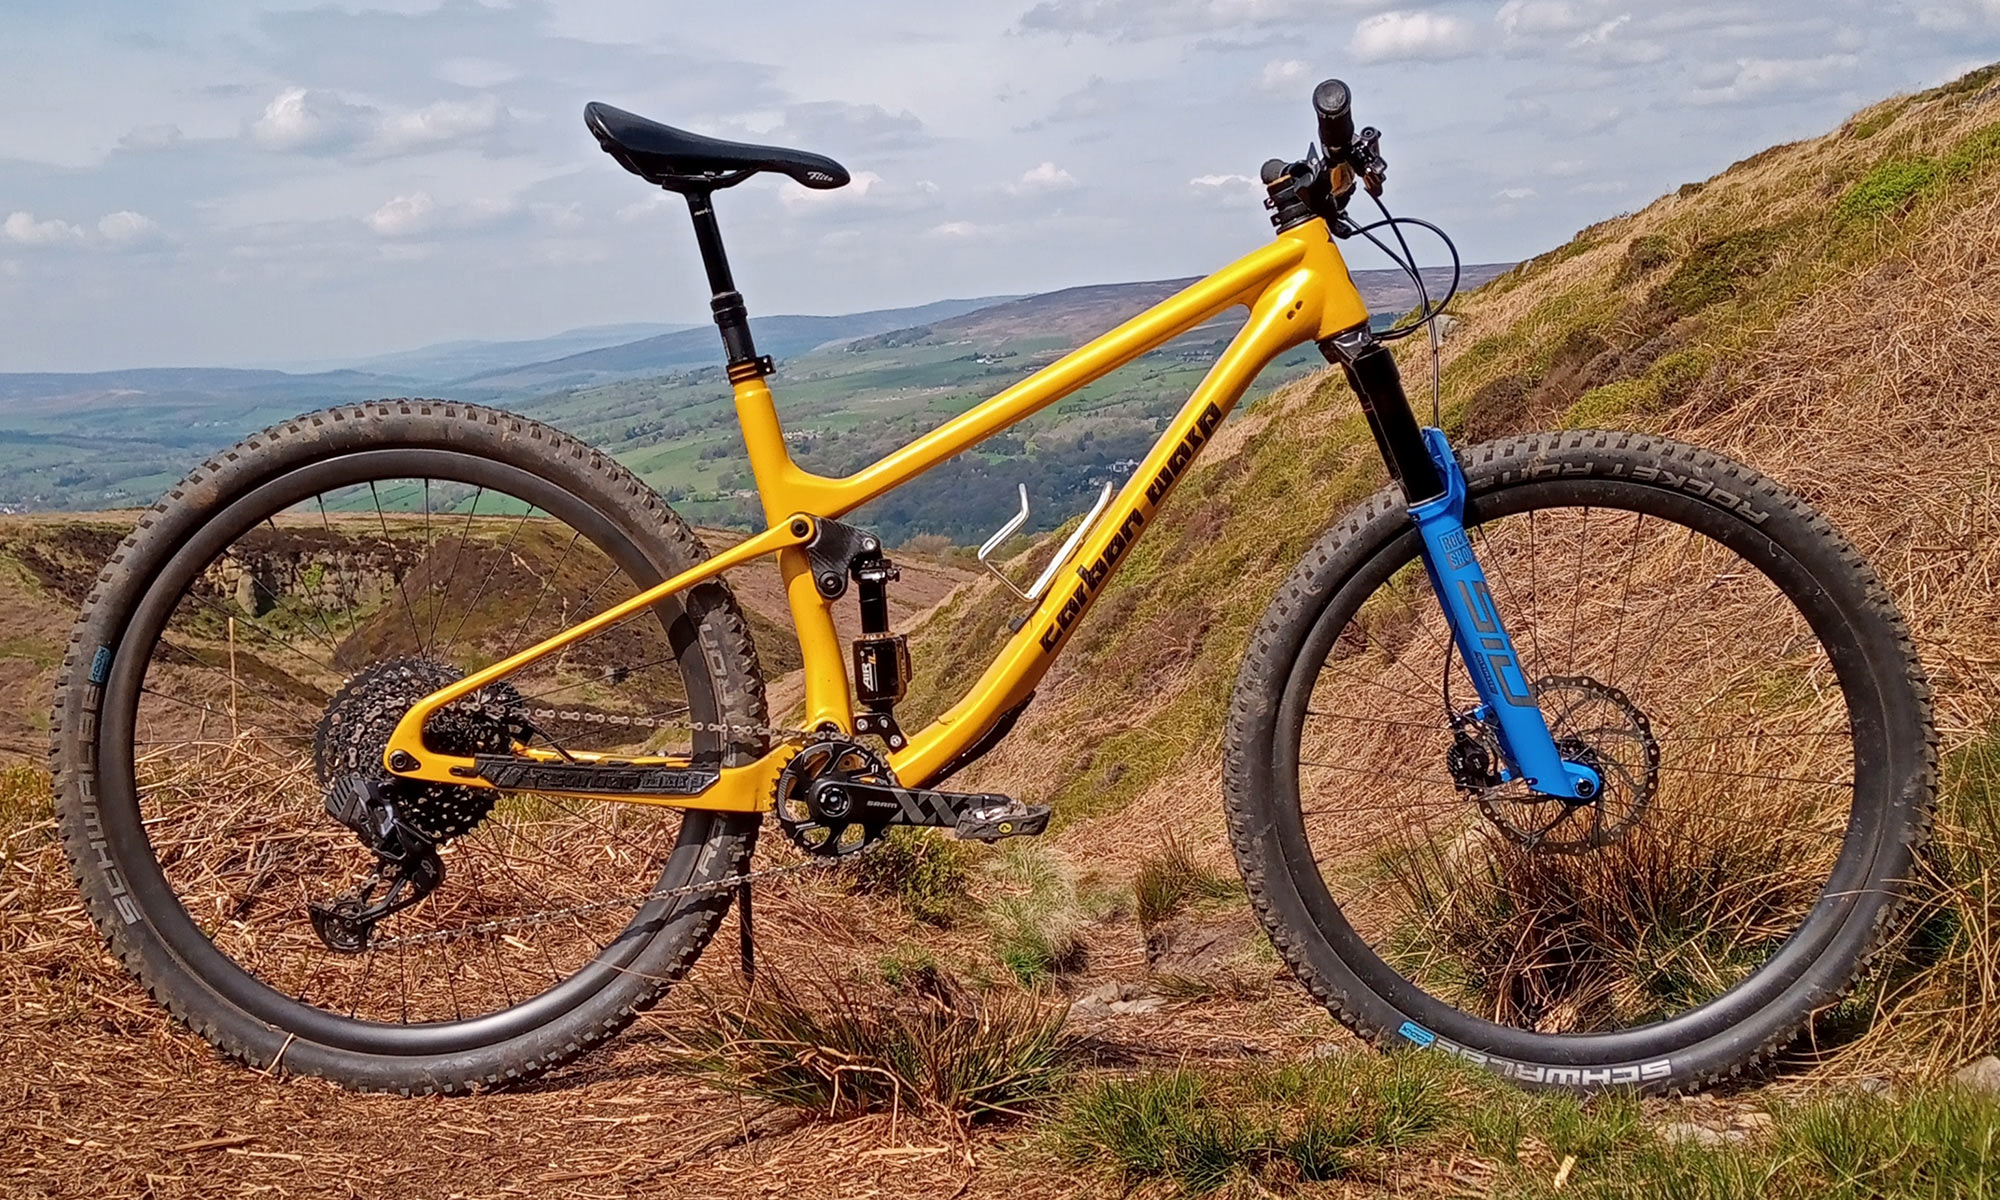 Carbon Wasp Truffle 120mm trail bike, short-travel UK-made carbon mountain bike, complete